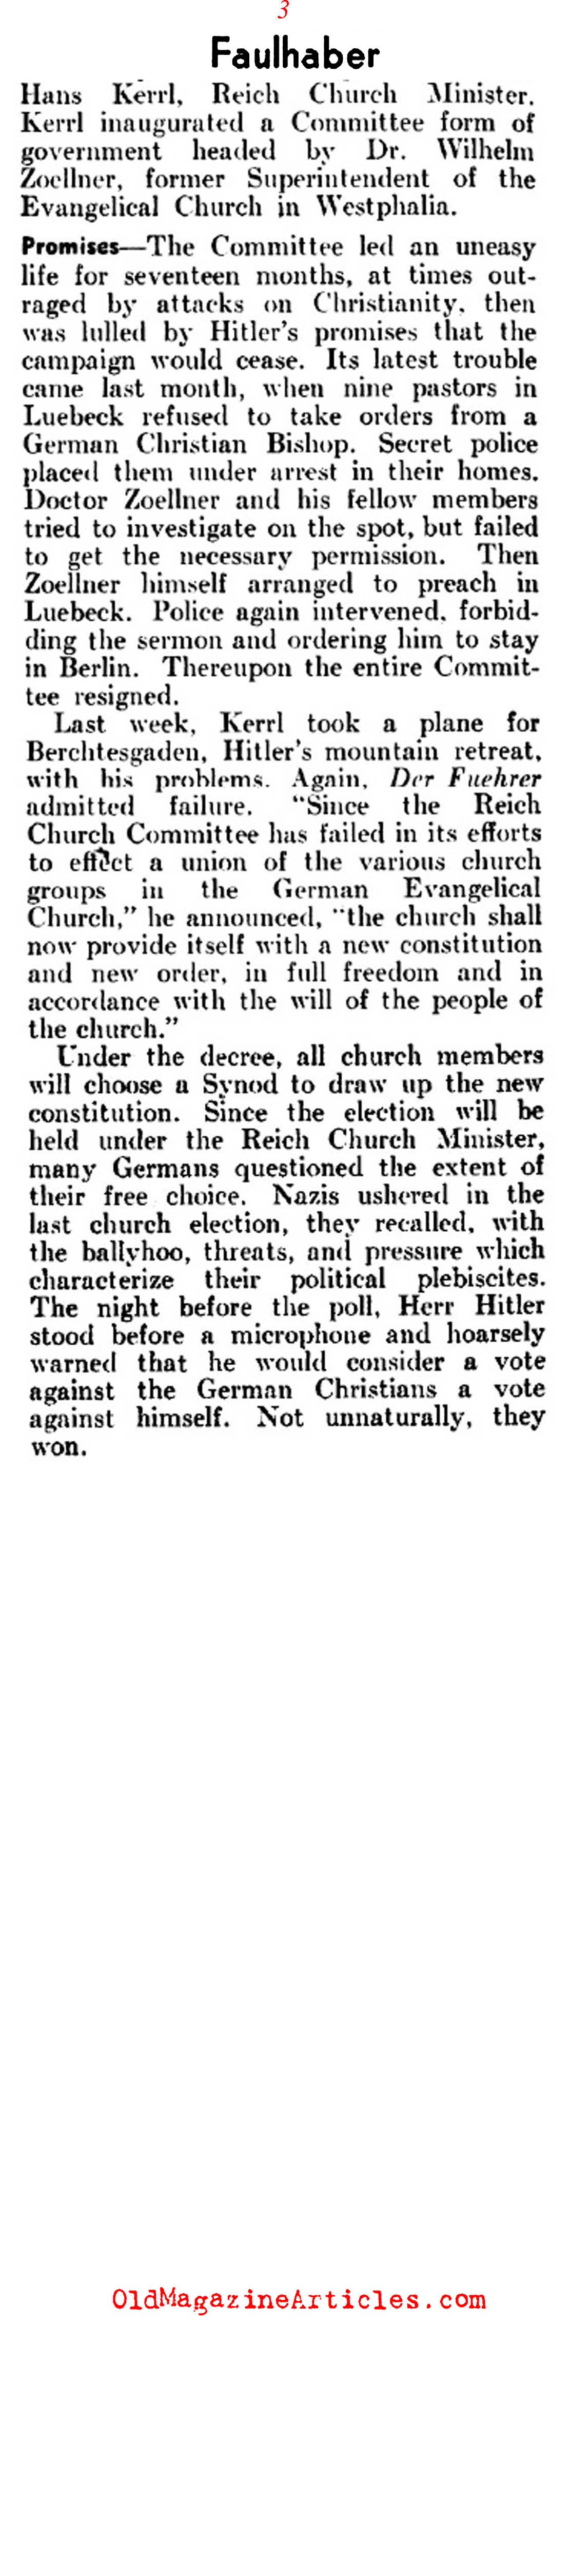 Catholic Hierarchy Pressured in 1930s Germany  (Literary Digest, 1937)